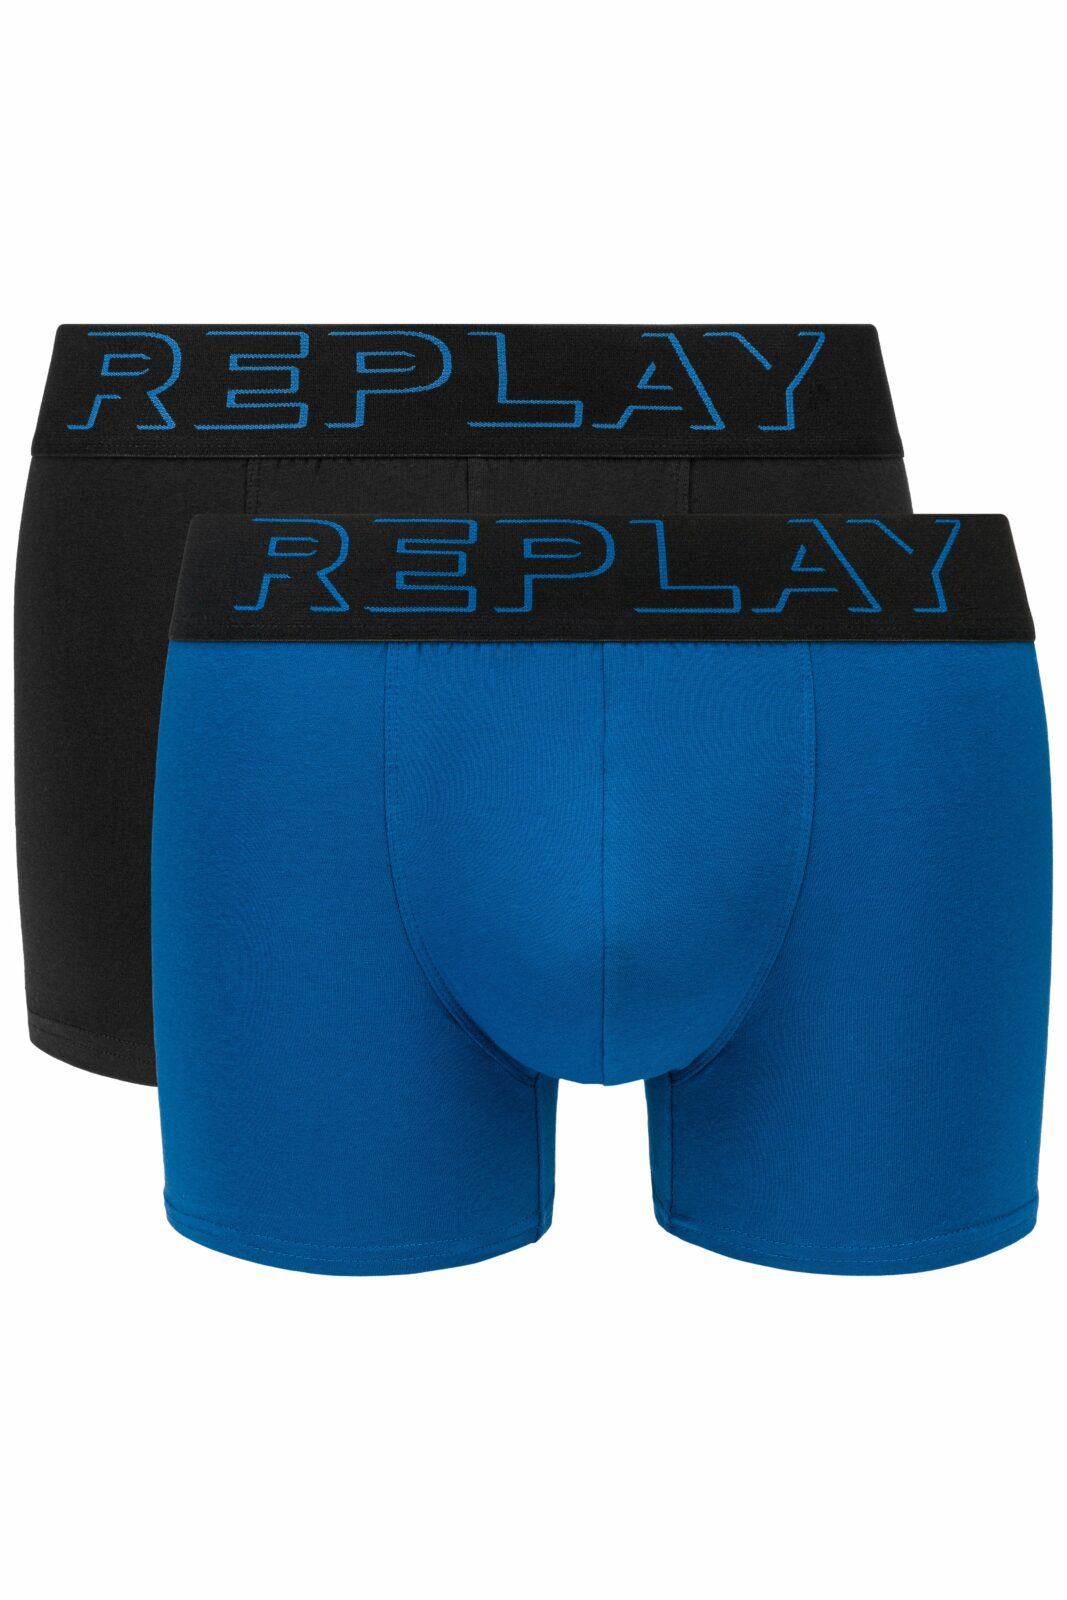 Replay Boxerky Boxer Style 2 T/C Cuff 3D Logo